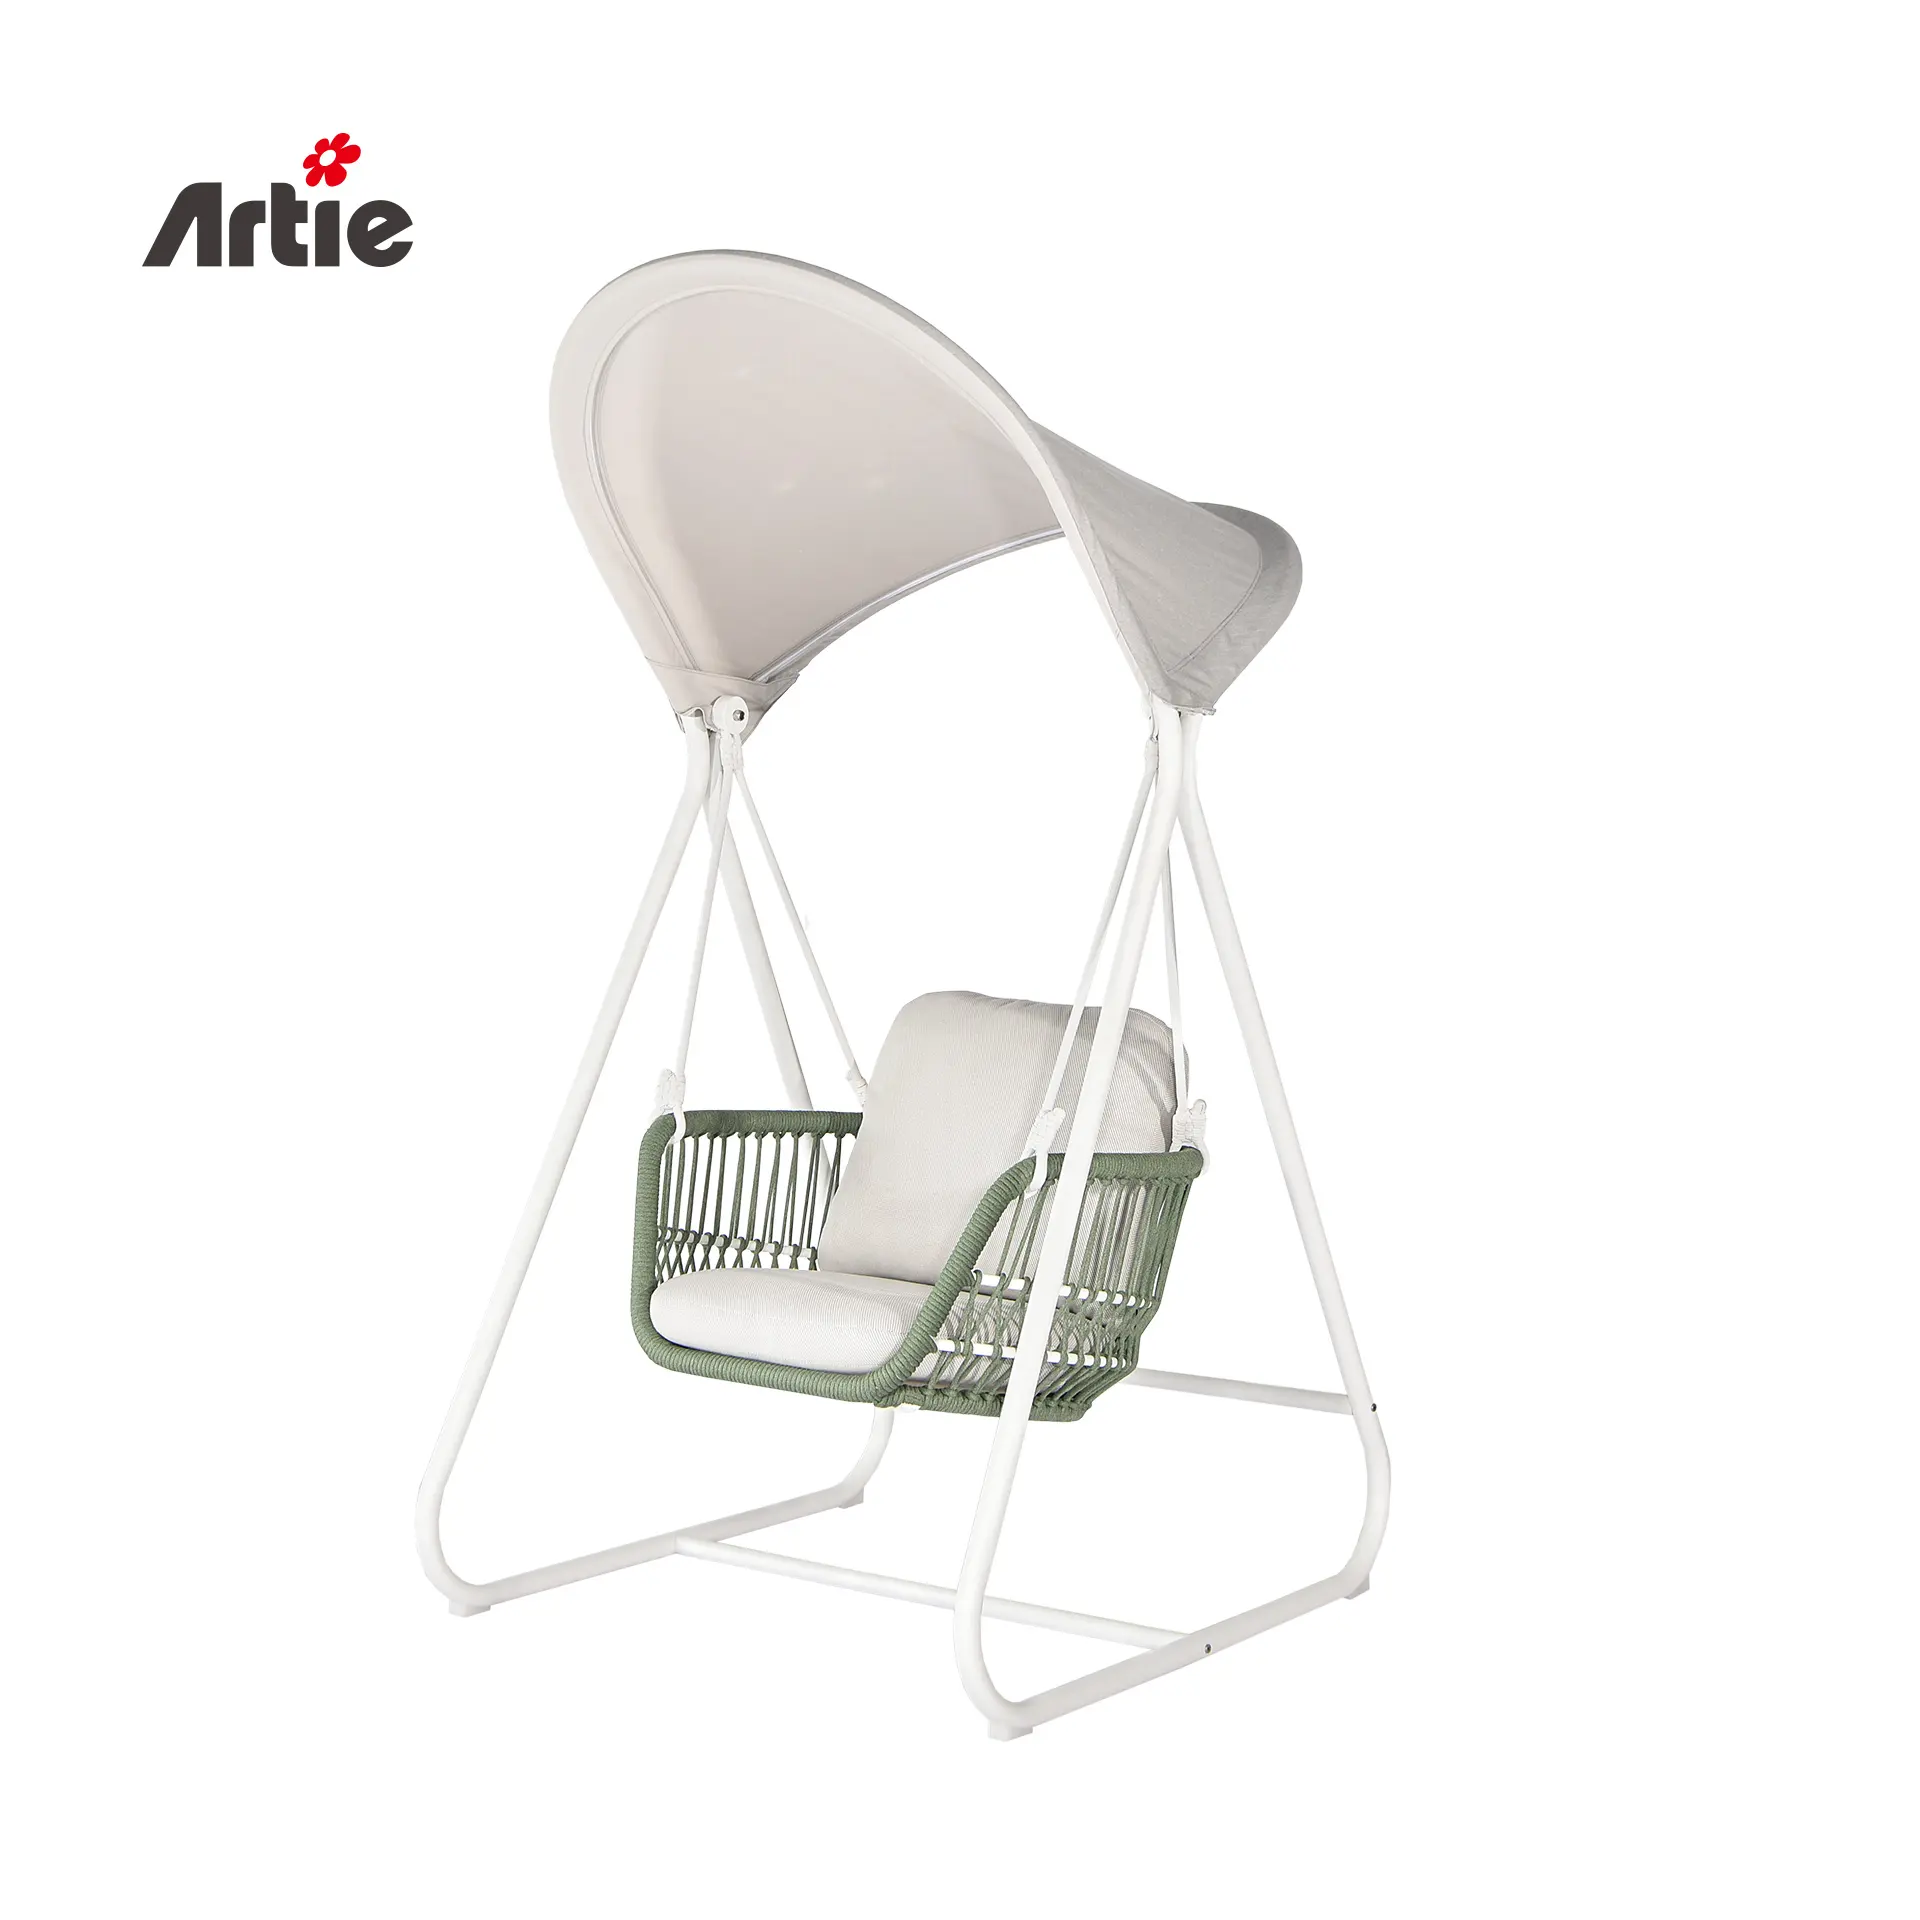 Artie Modern Garden Furniture Terrace Balcony High Quality Price Hanging Chair Outdoor Furniture Patio Swing